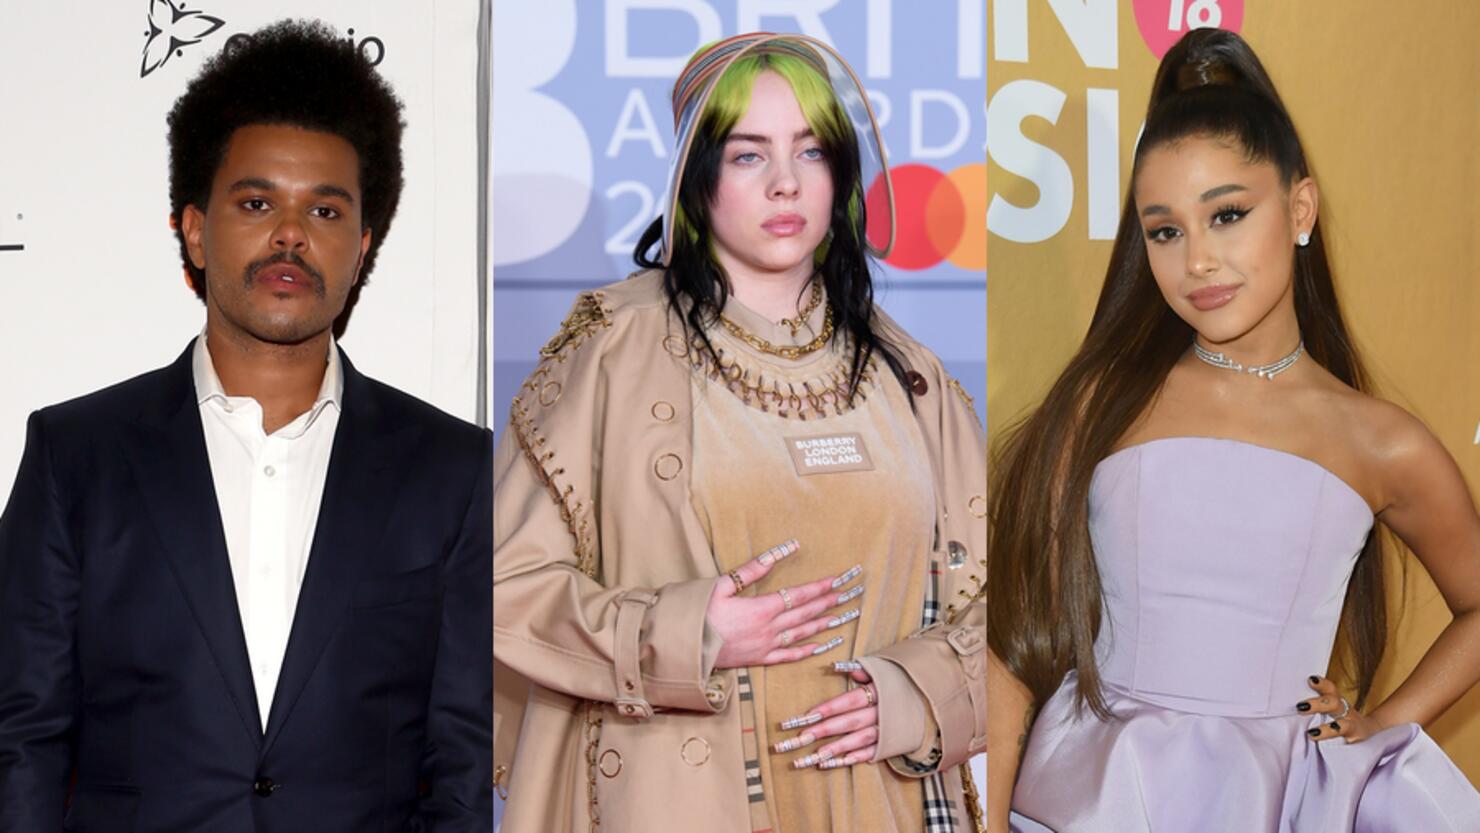 Billie Eilish, The Weeknd And Others Are Releasing Their Own Face